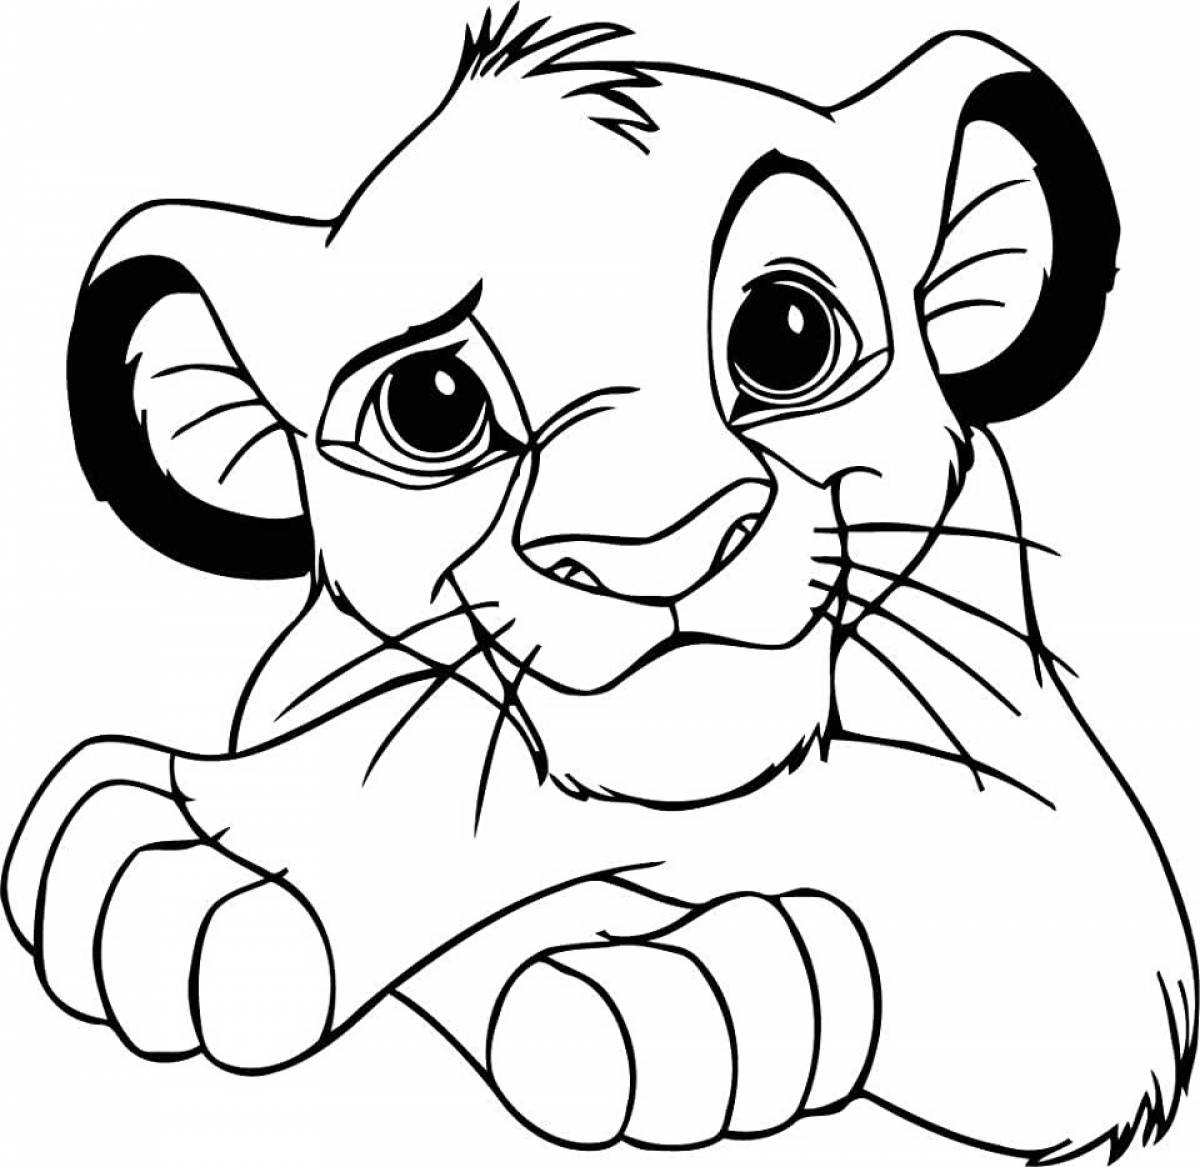 Junior Simba's animated coloring page